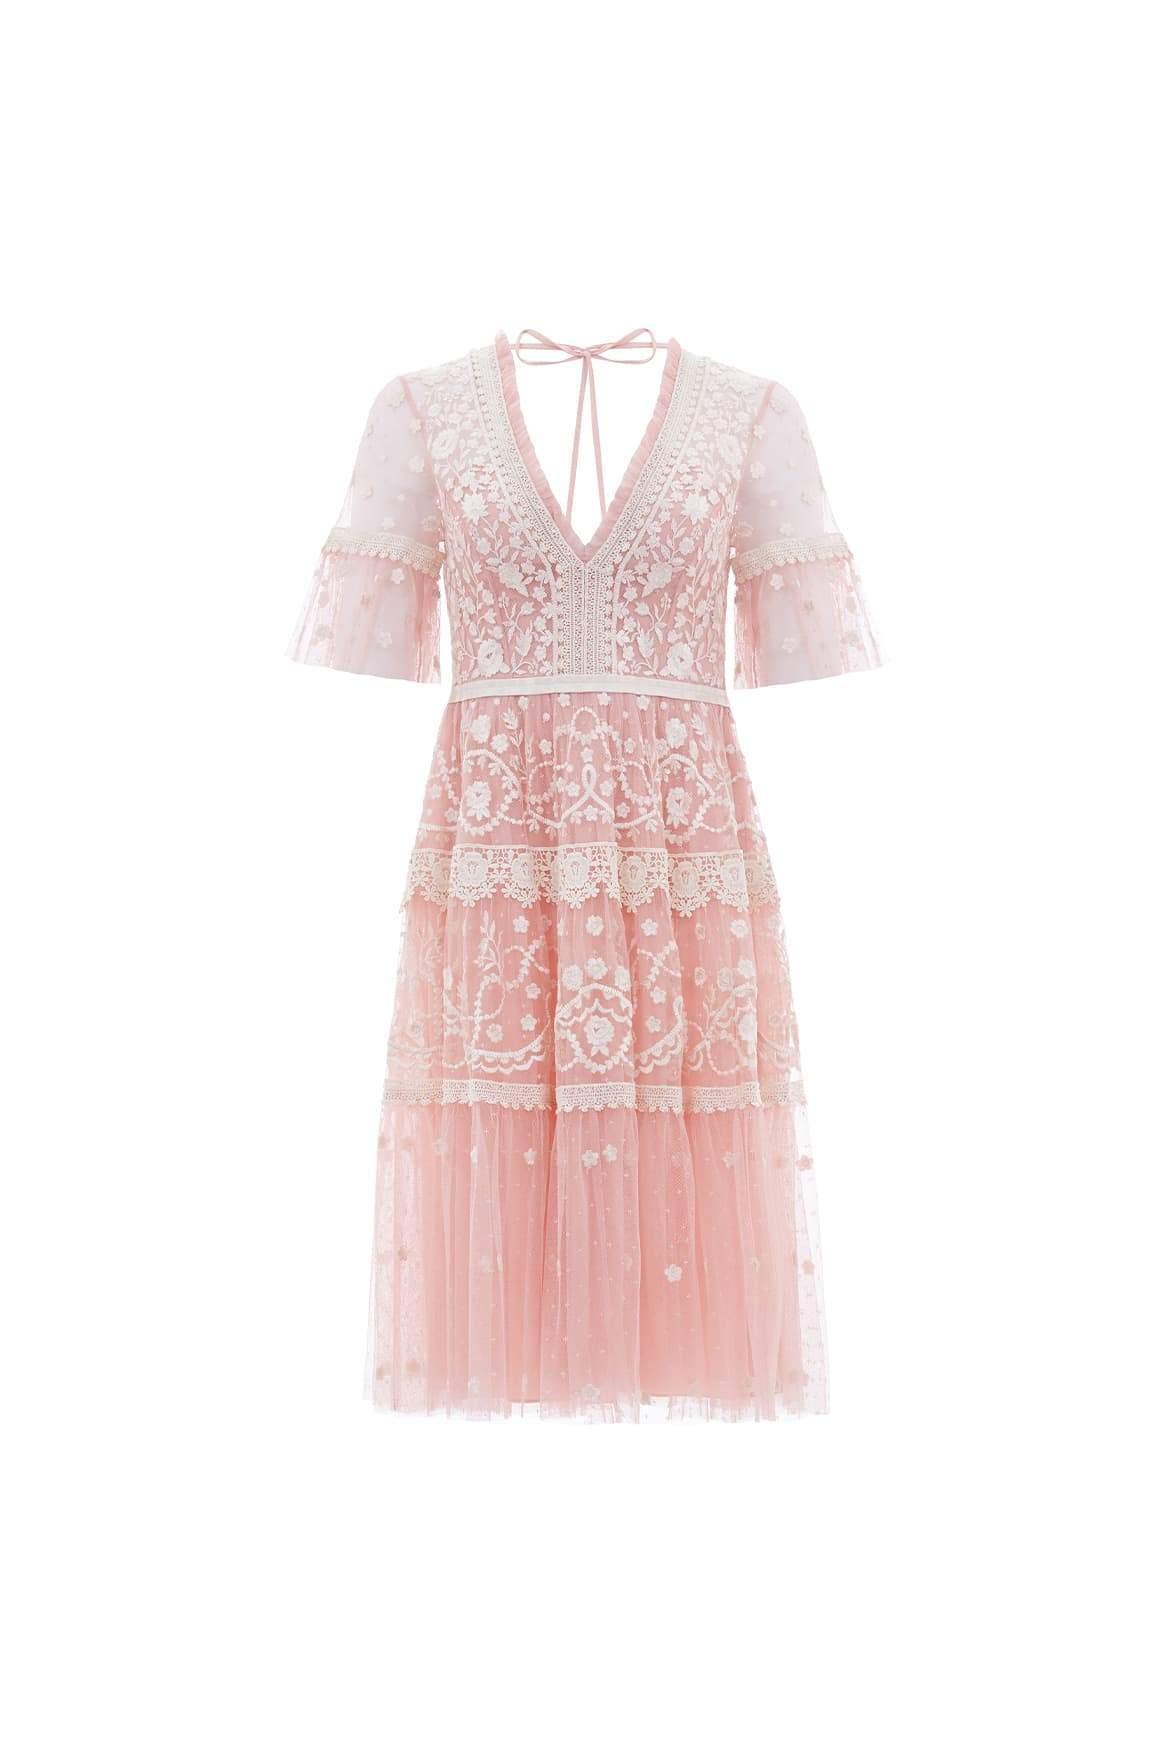 Needle & Thread Midsummer Lace Dress in Pink - Lyst